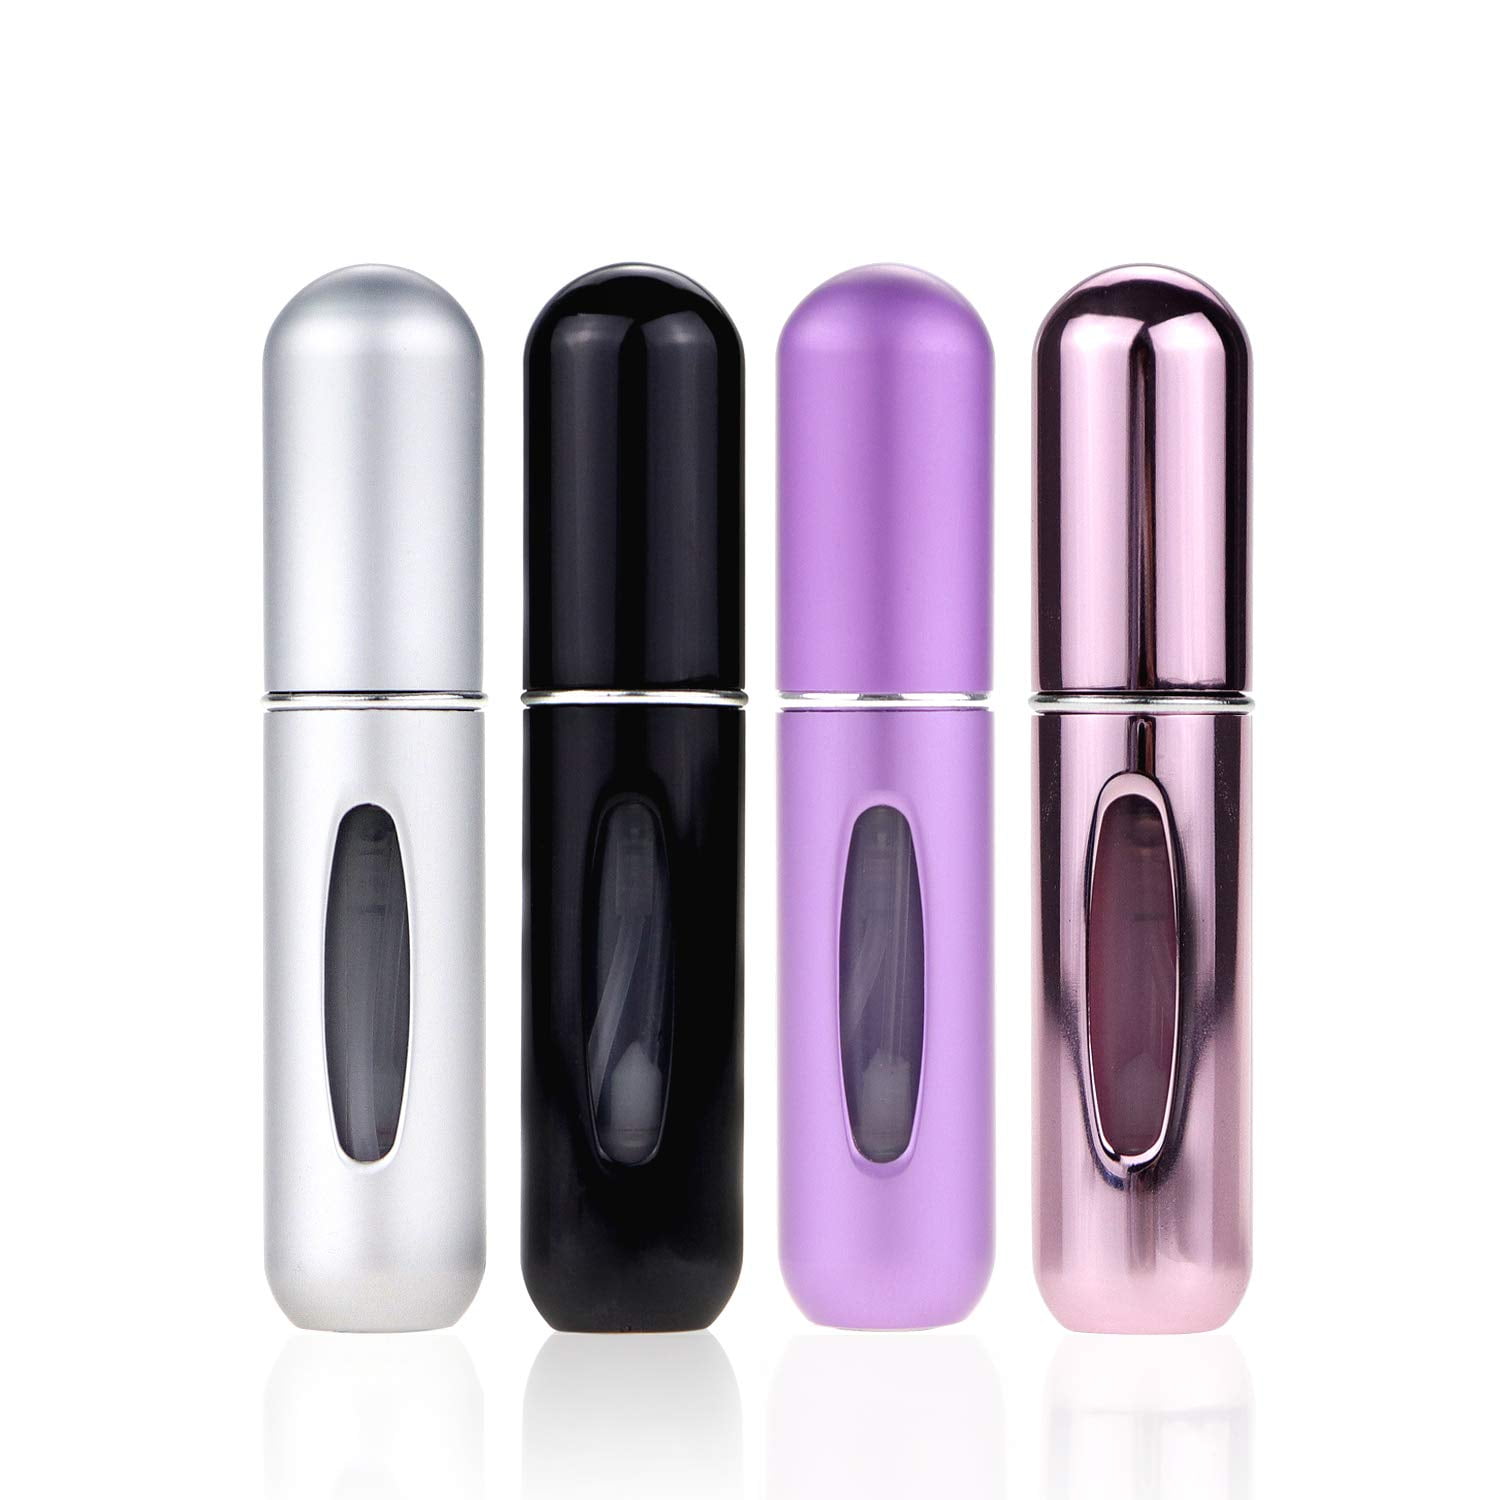 HINNASWA Refillable Perfume Atomizer Mini Refillable Perfume Atomizer Empty  Spray Bottle Atomizer for traveling and outgoing 4 pcs of 5ml with RANDOM  colors